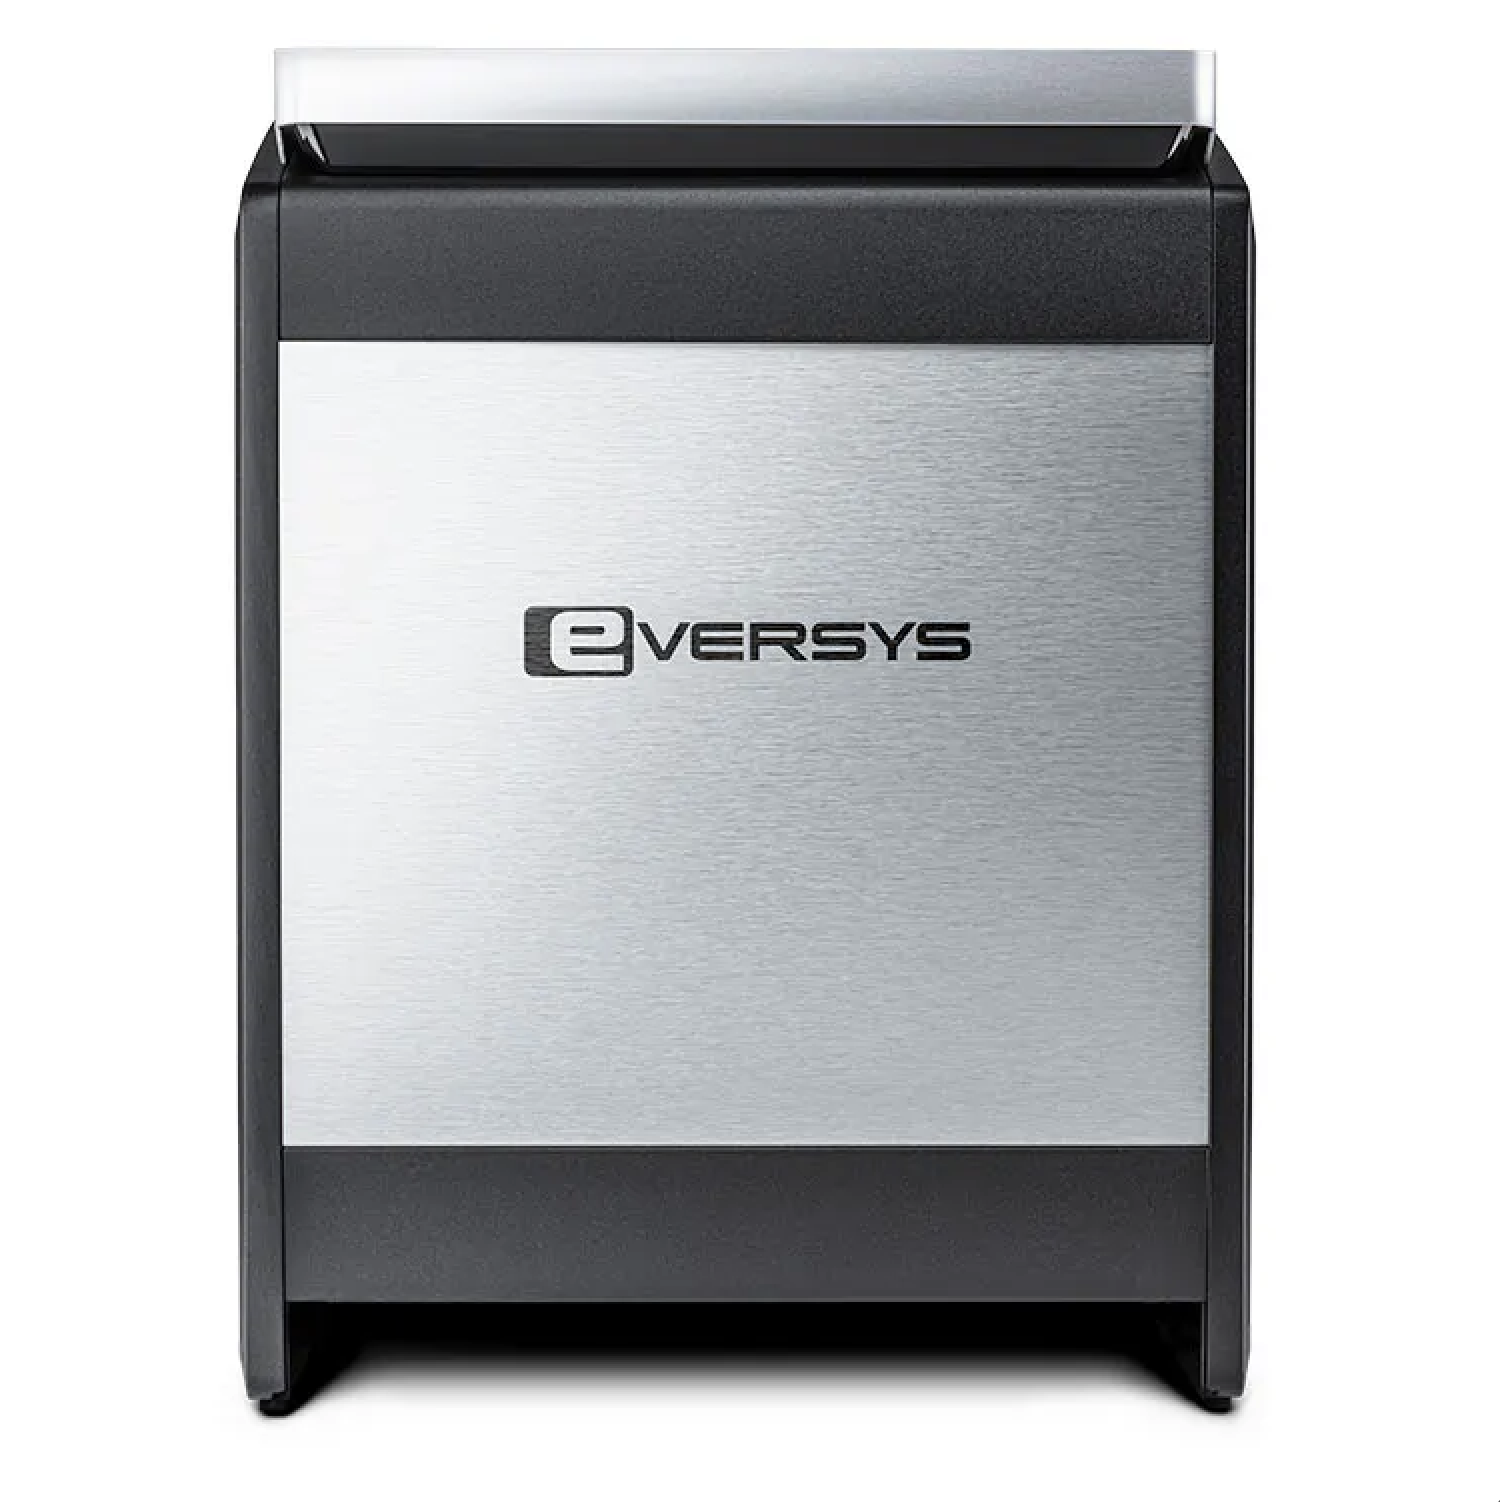 Eversys Cameo C2S/Core Tempest